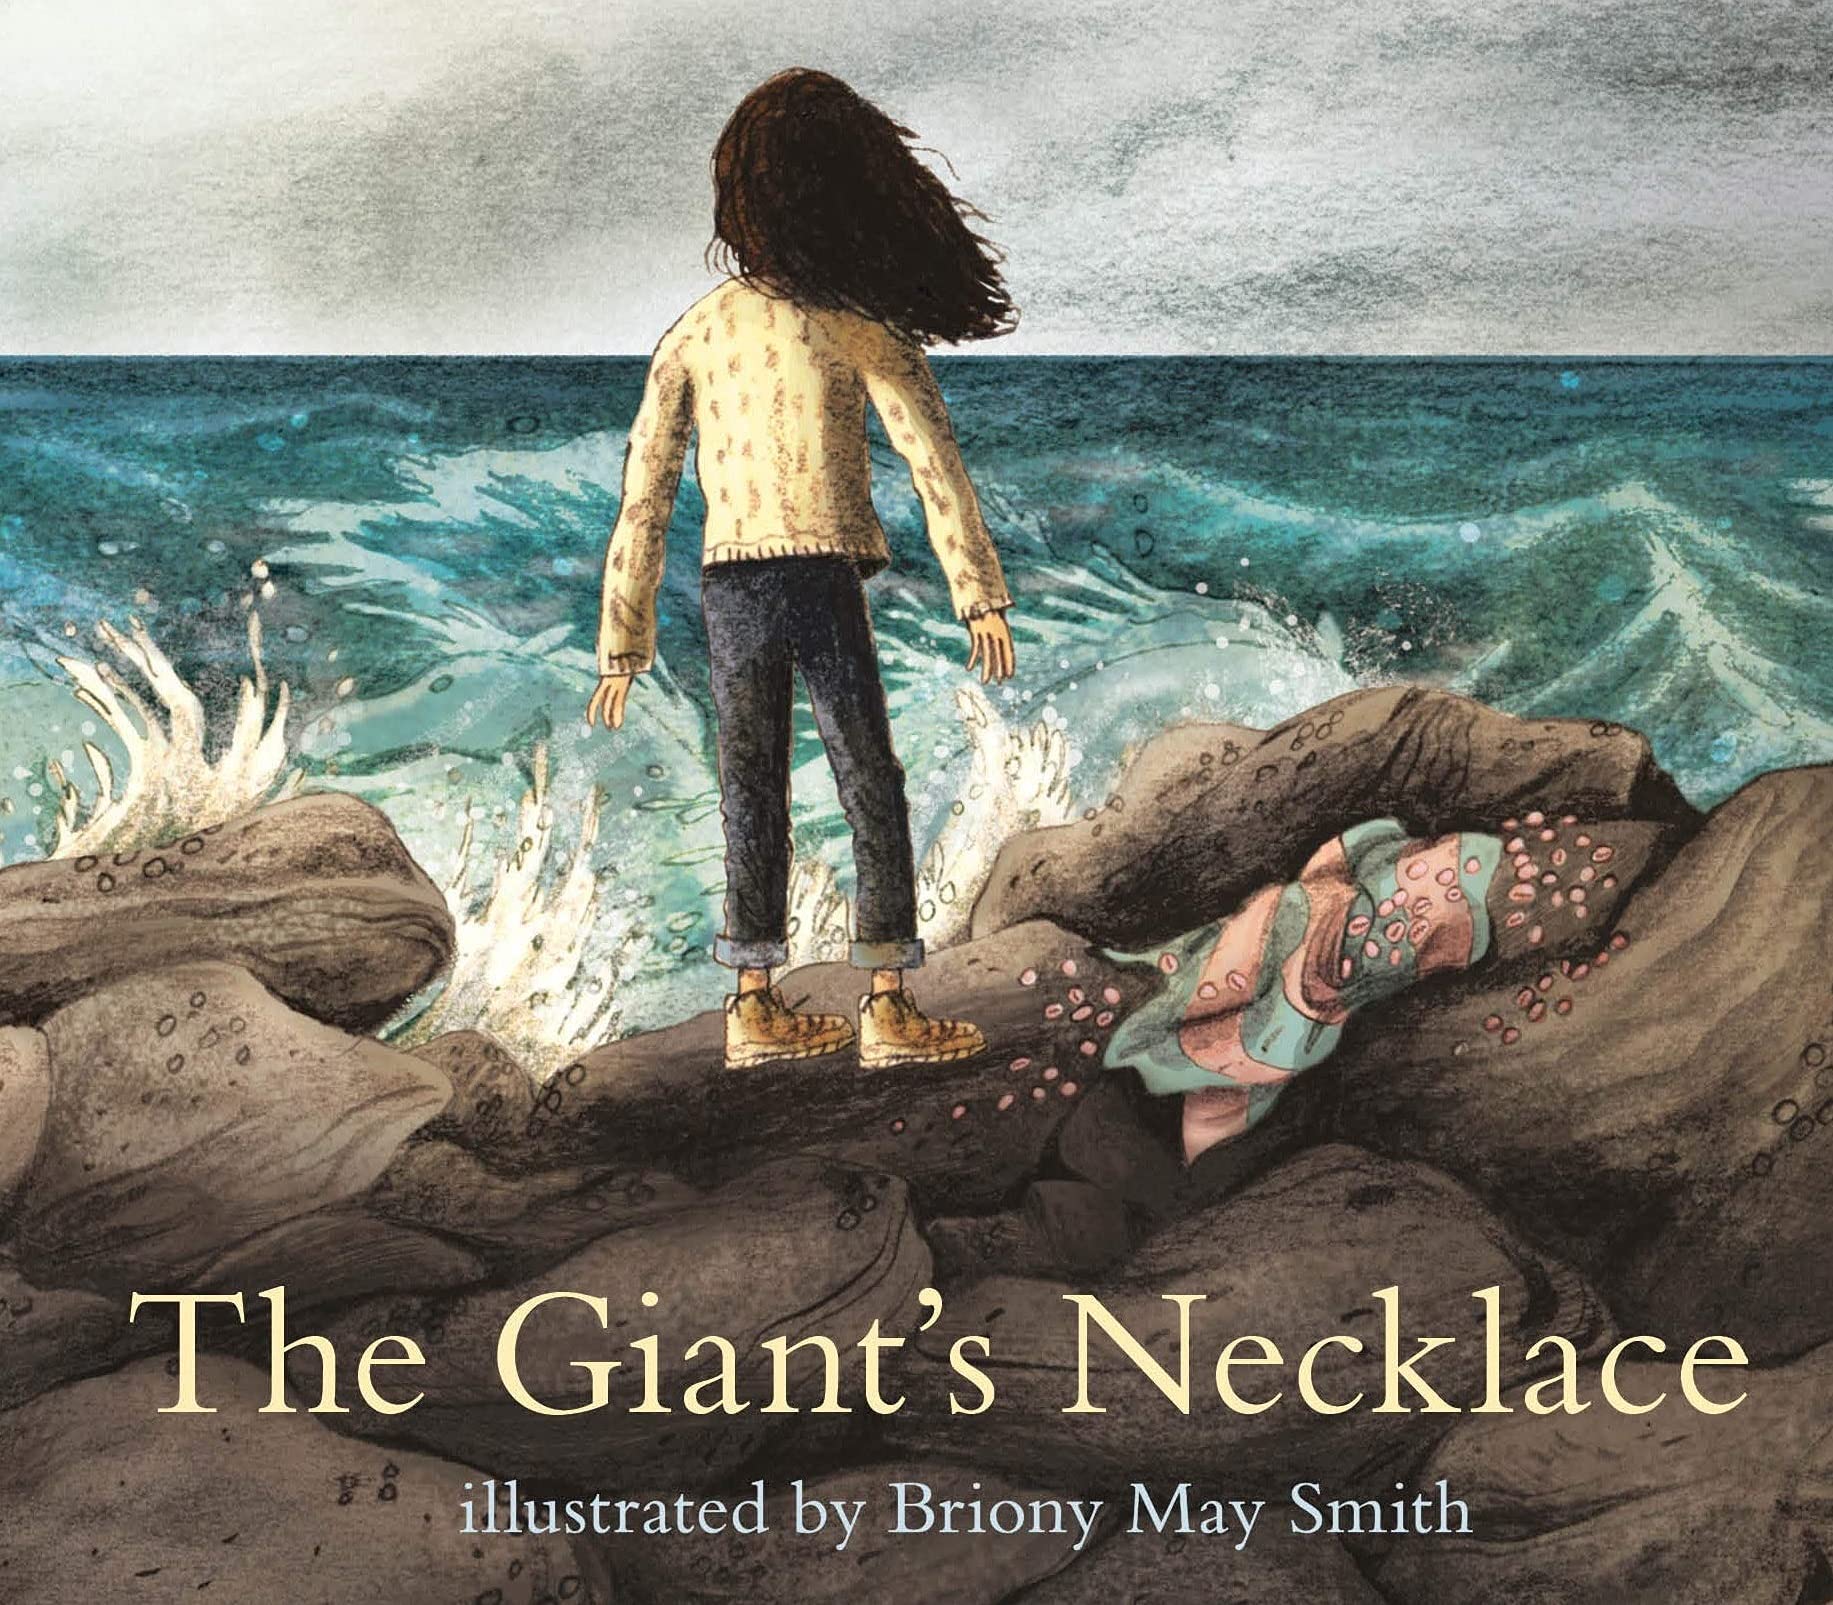 The Giant's Necklace